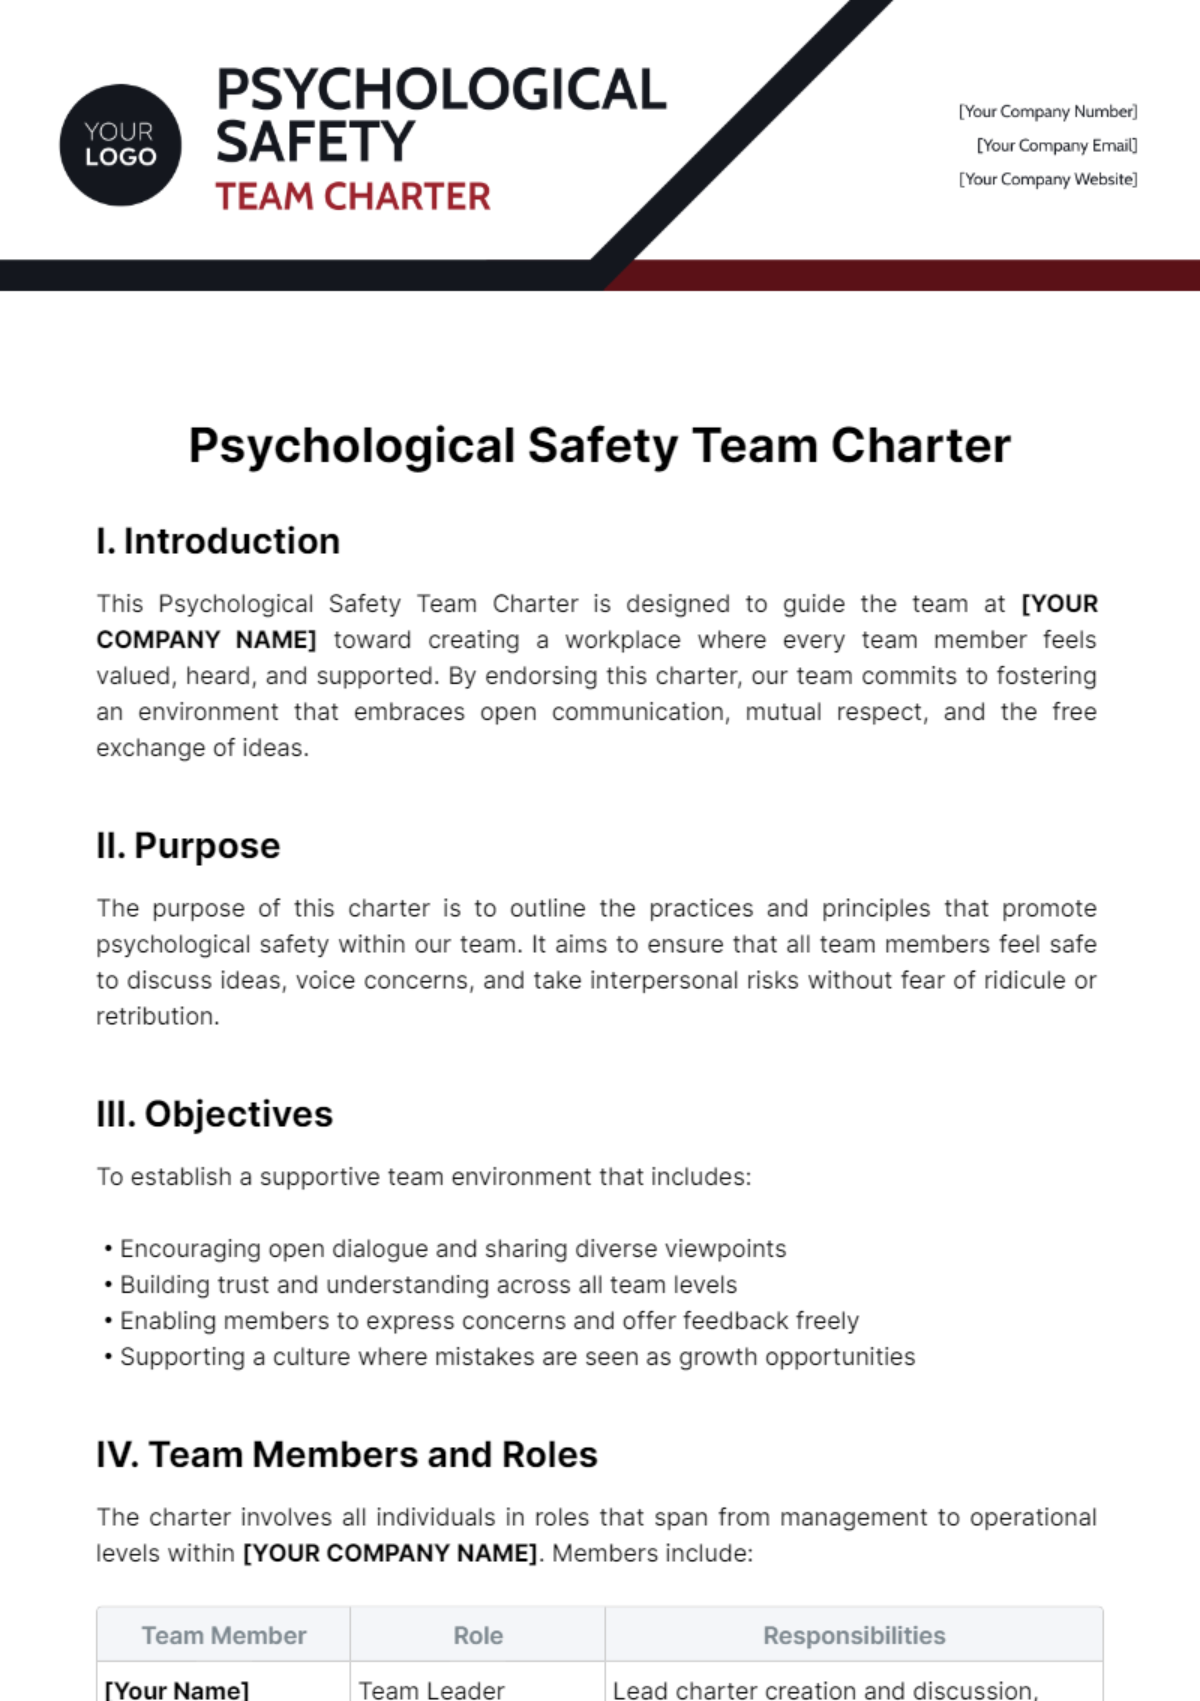 Free Psychological Safety Team Charter Template